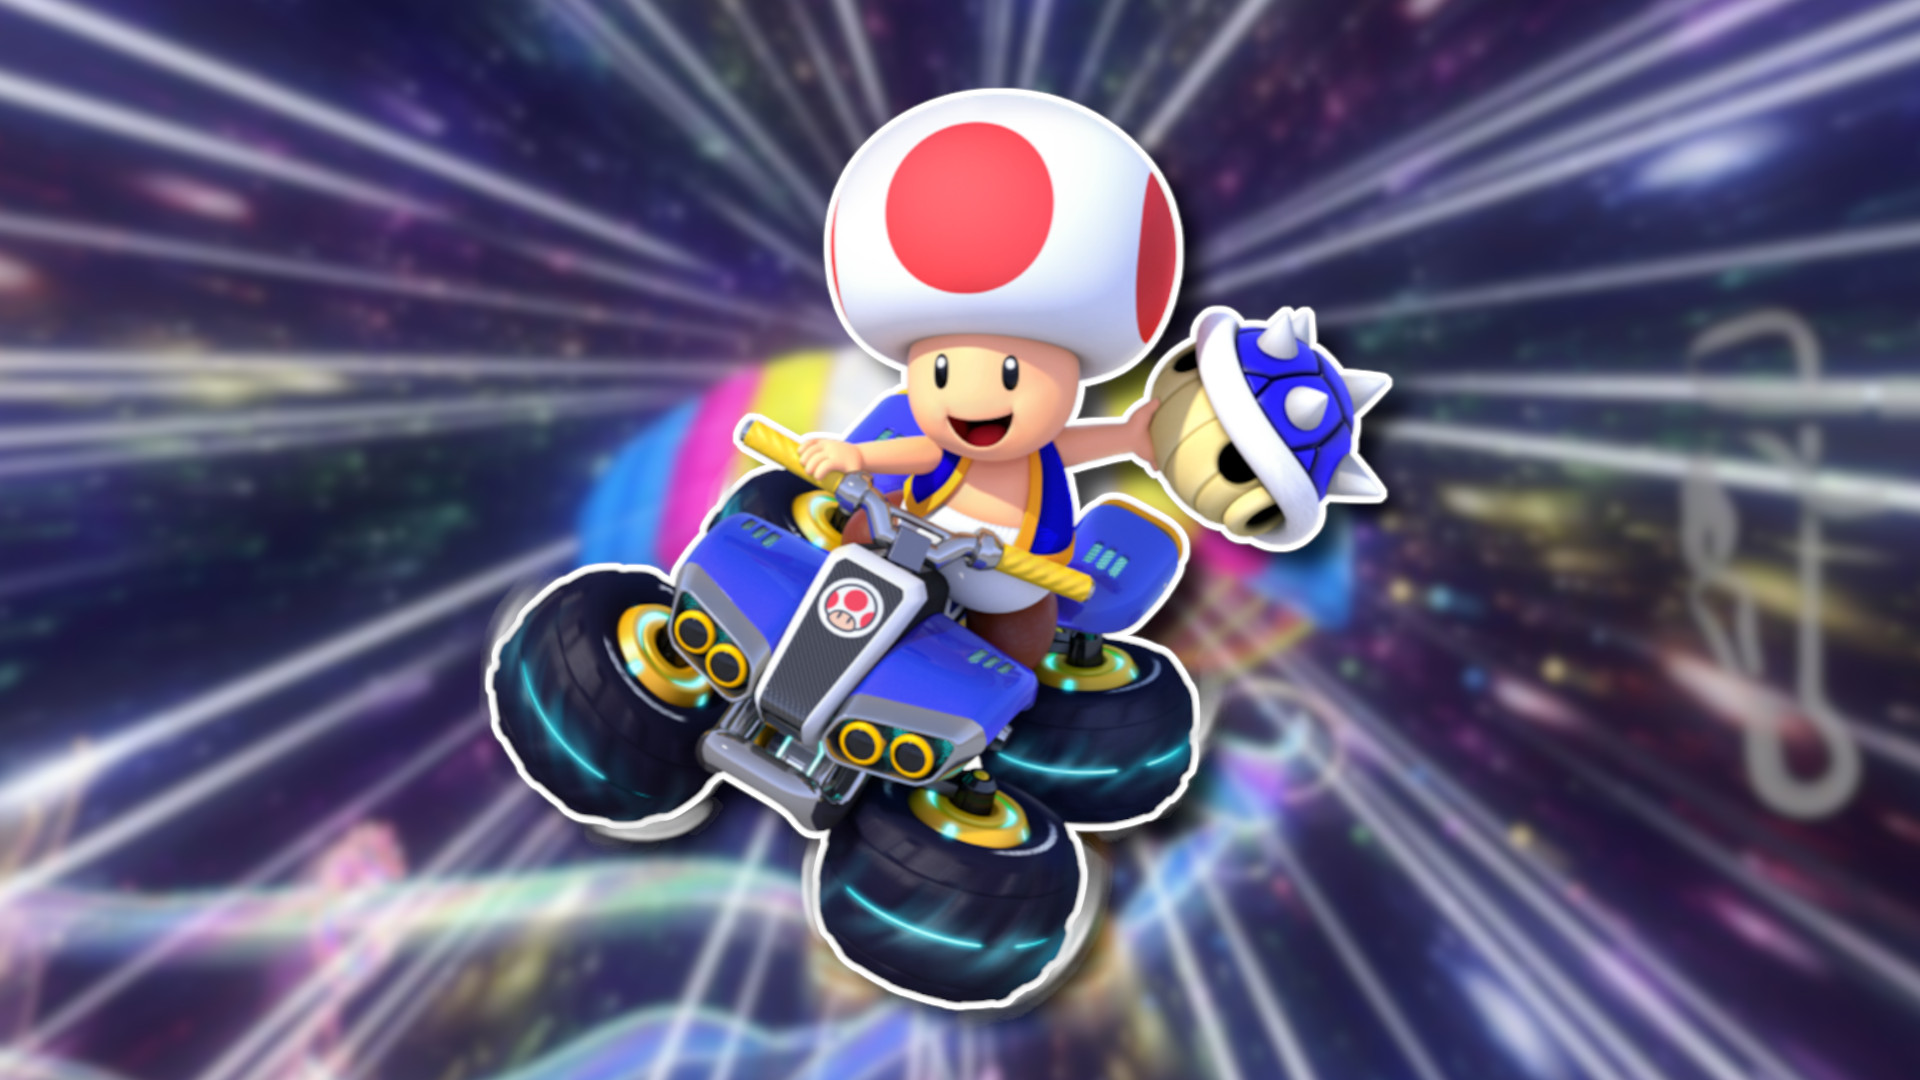 Mario Kart 8 Deluxe's latest track is an instant classic